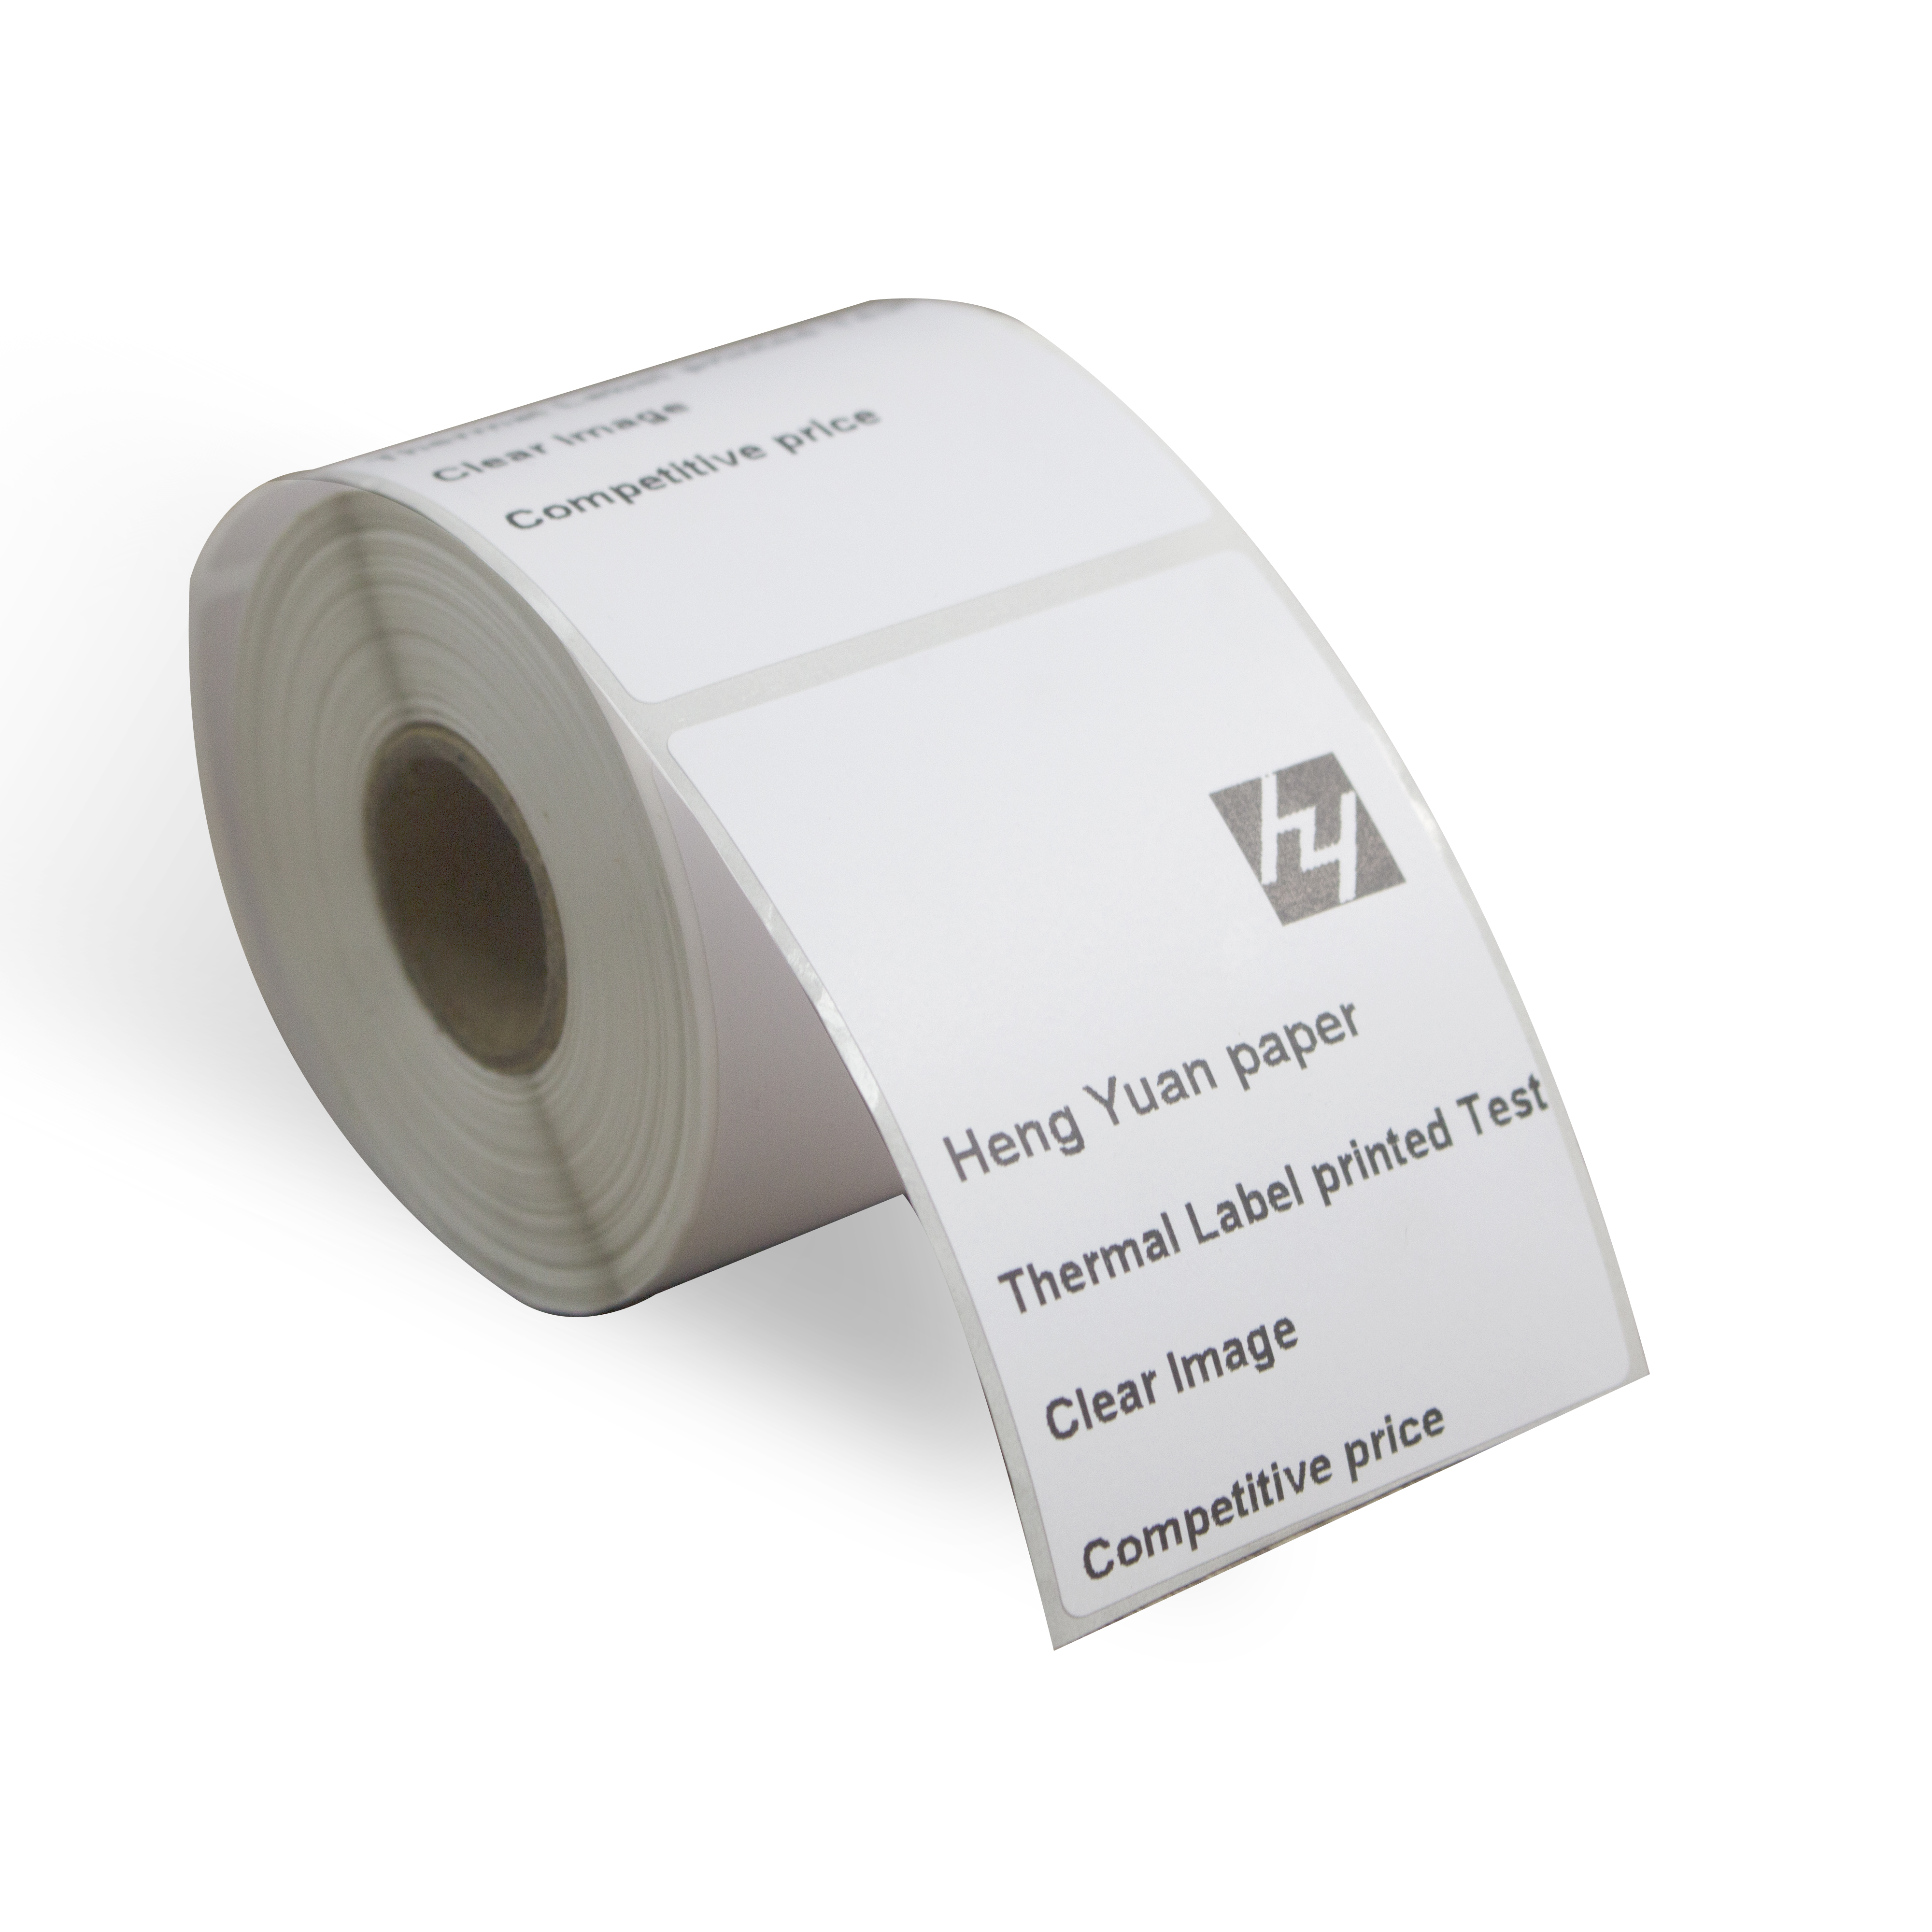 4X6 1000pcs 100x150mm Self Adhesive Printing Sticker Thermal Transfer Label Barcode Sticker Semi Gloss Paper Labels Shipping Label Rolls